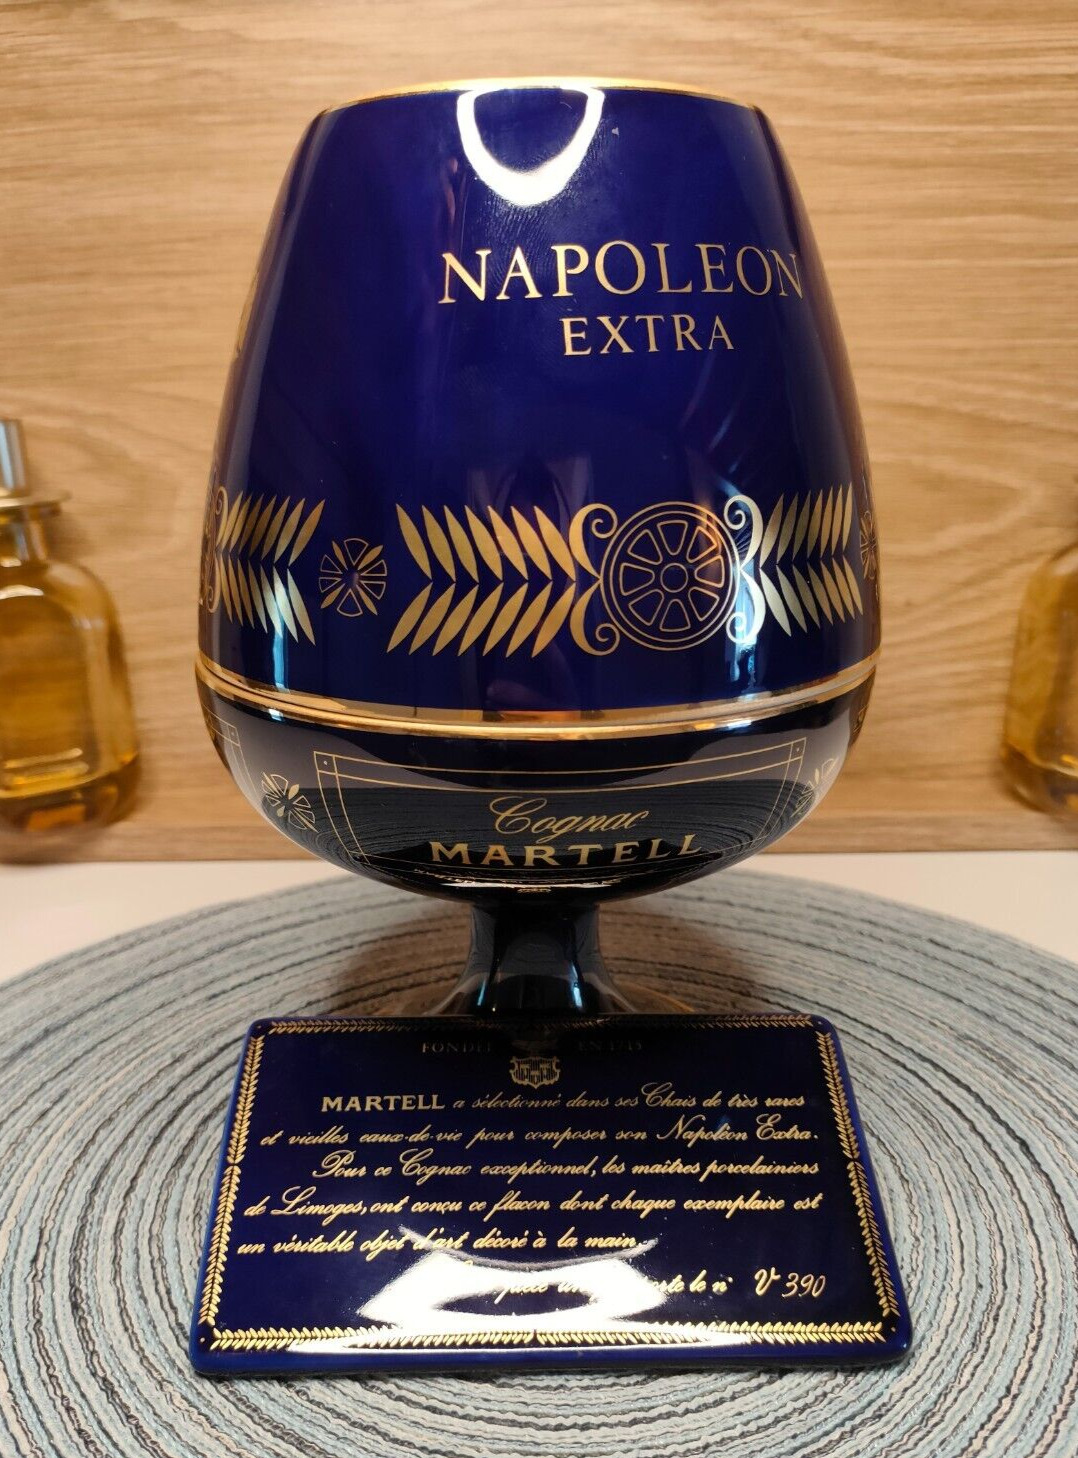 Napoleon Hand Decorated Martell Extra Cognac Bottle, Bearing Number V 390